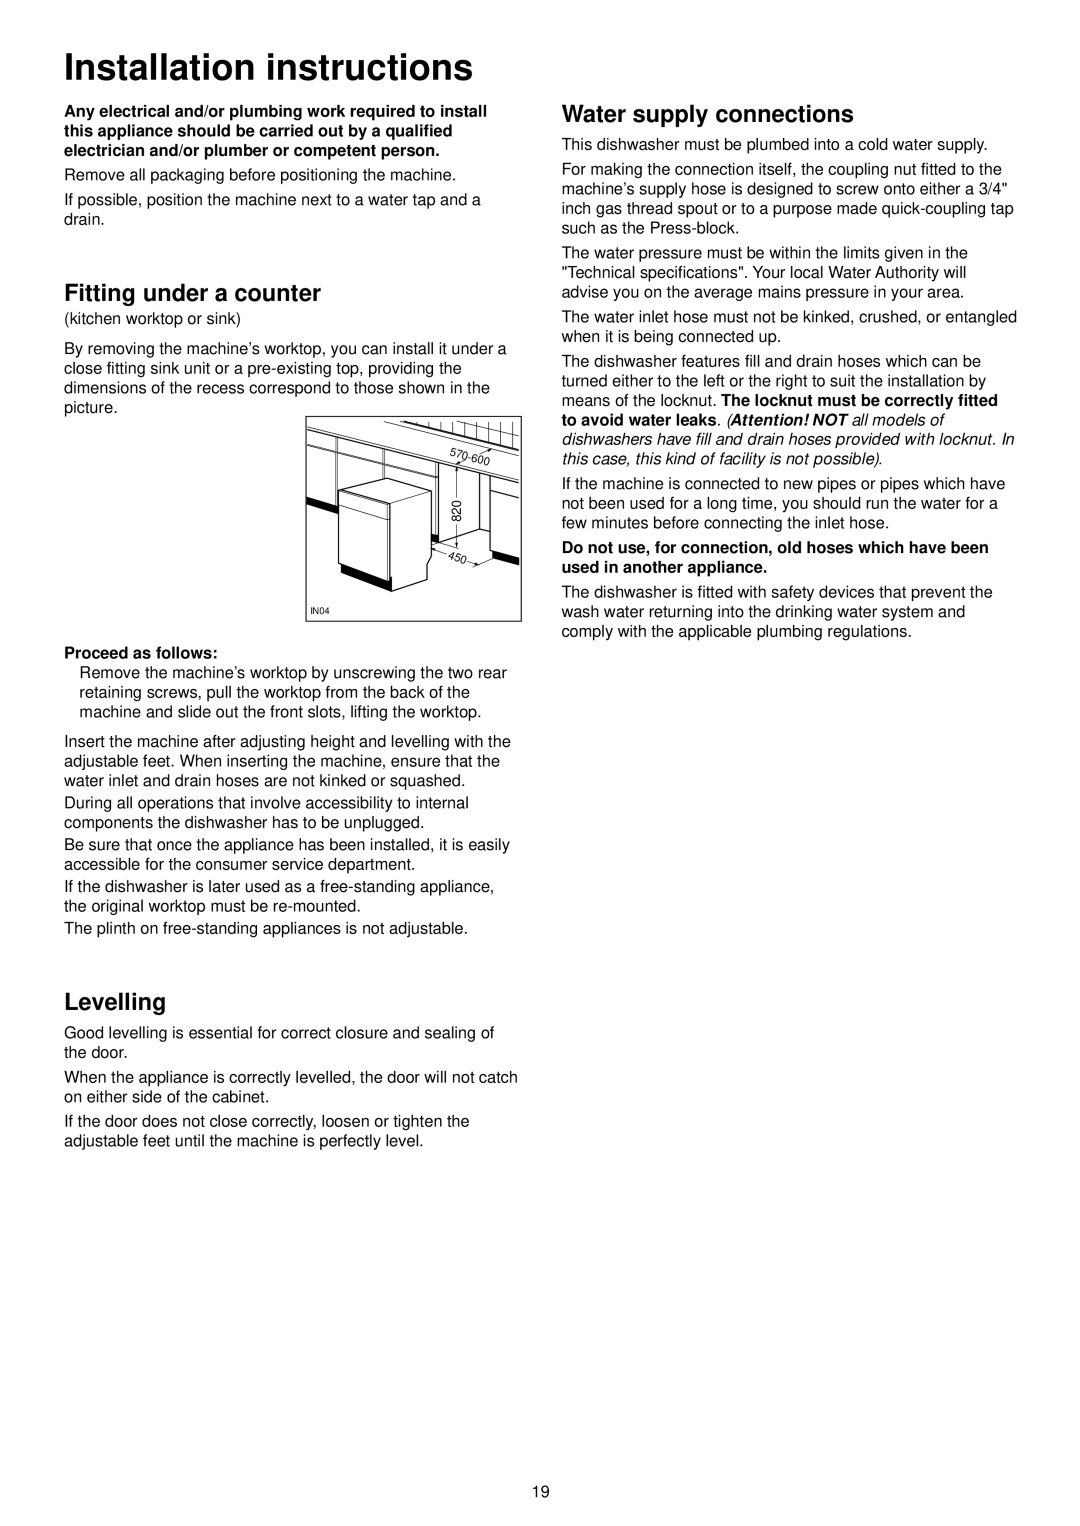 Zanussi ZSF 4111 manual Installation instructions, Fitting under a counter, Levelling, Water supply connections 